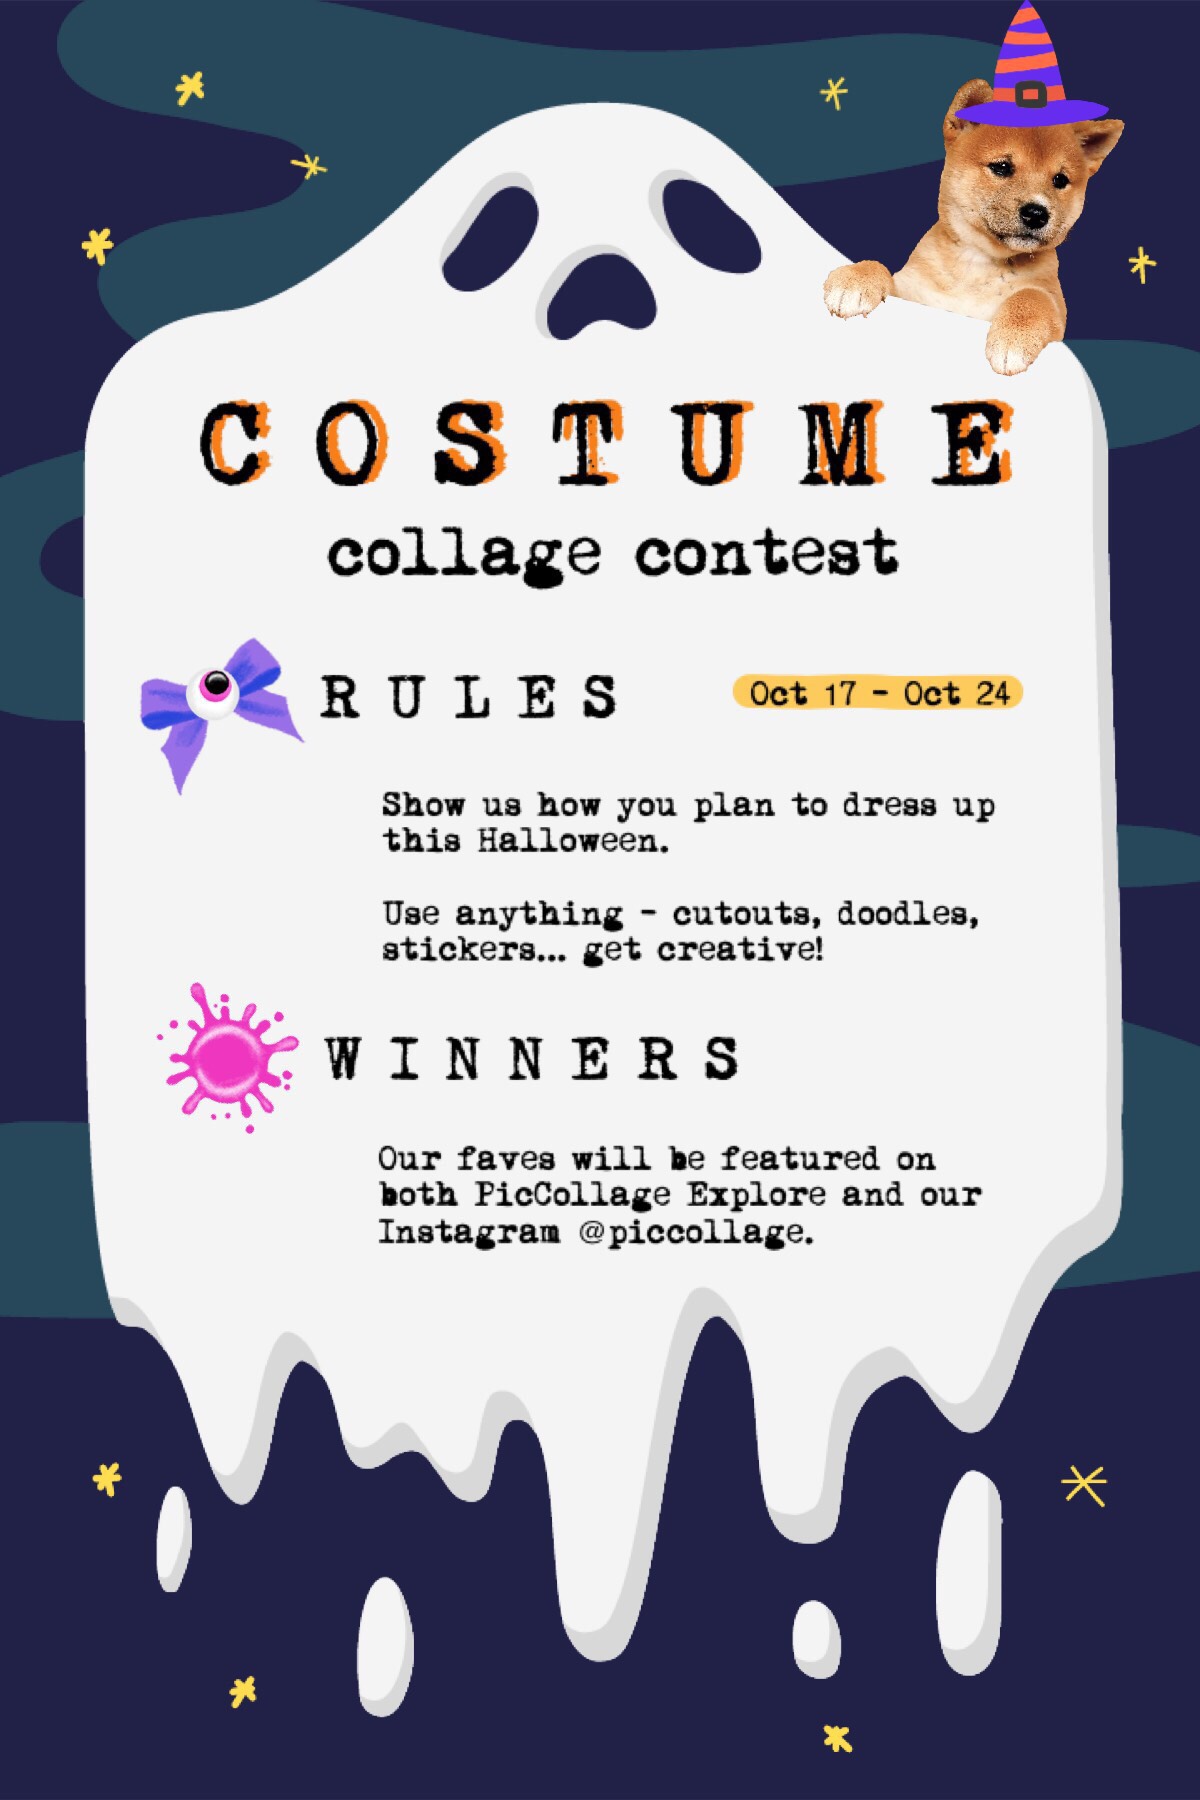 🎃Halloween Costume Contest! Get creative and show us what you’ve got! 👻